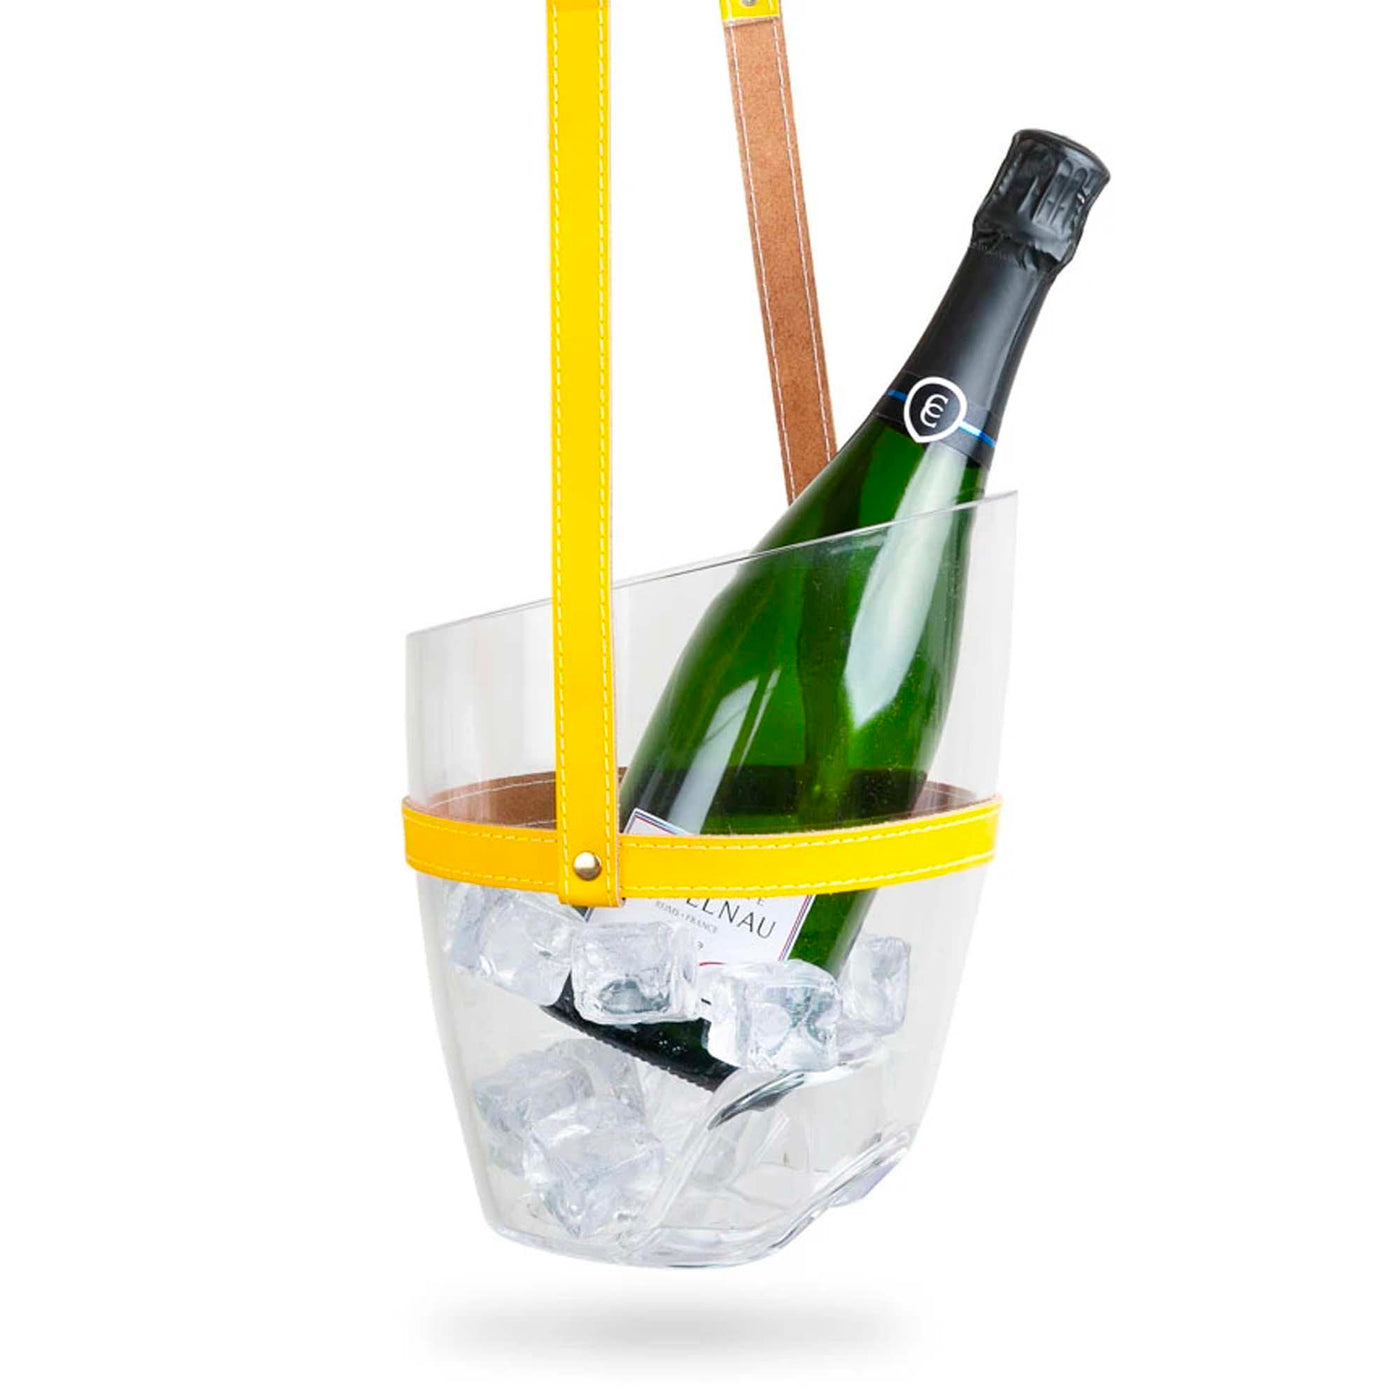 "Keep Your Cool" Champagne Bucket , Heating & Plumbing London, Chillers + Ice Buckets- Julia Moss Designs